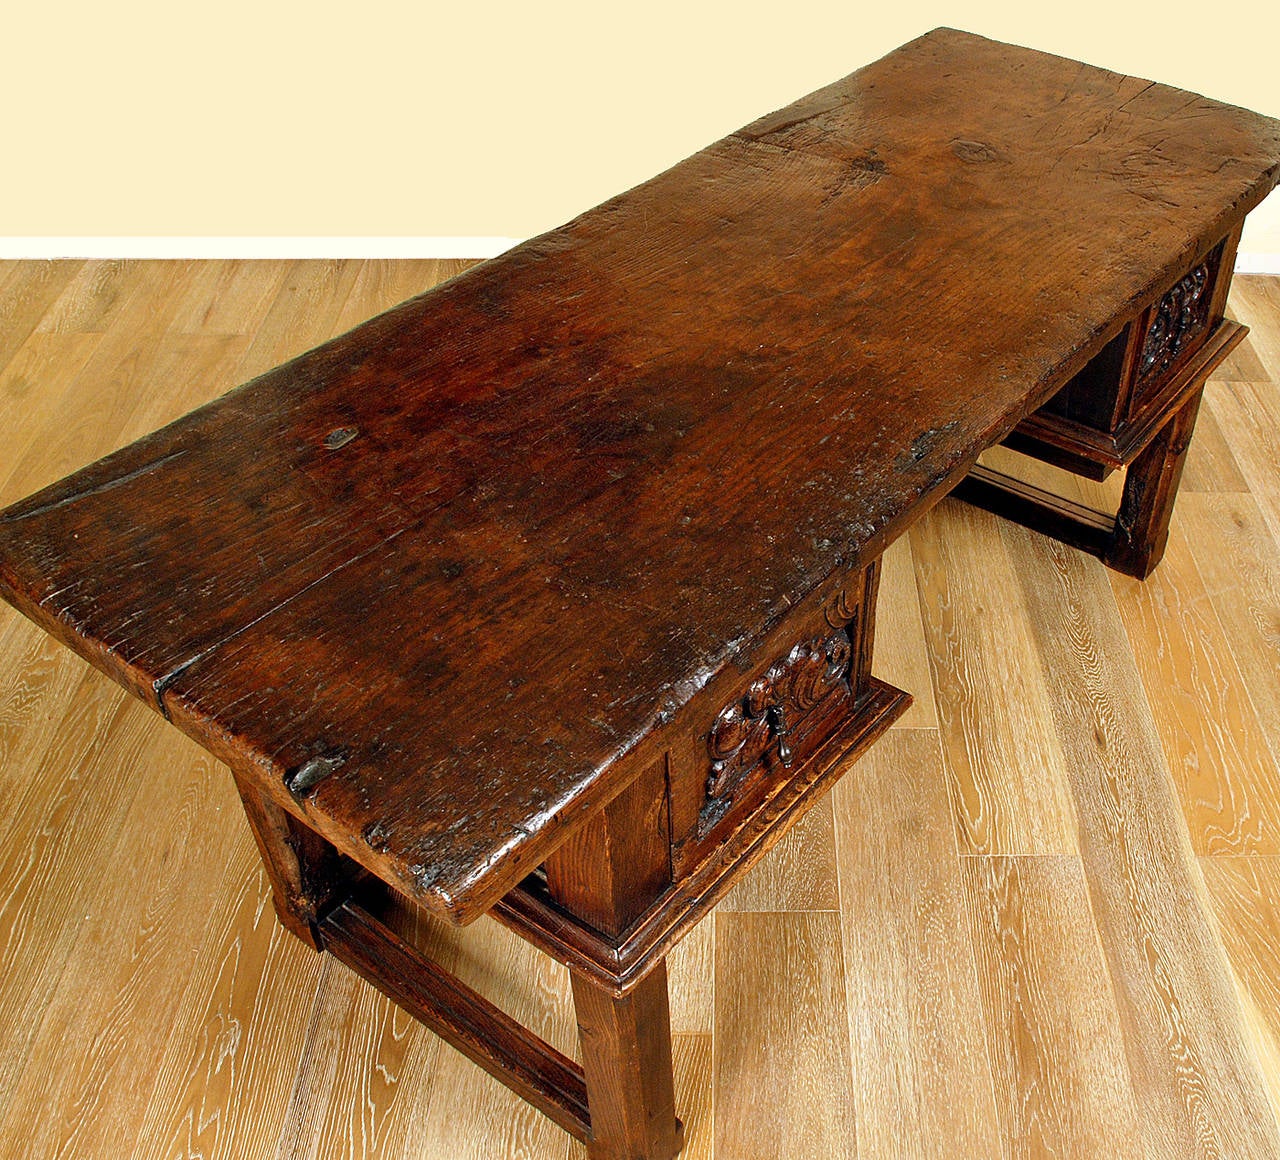 Late 17th Century Spanish Baroque Period Chestnut Kneehole Desk In Excellent Condition For Sale In San Francisco, CA